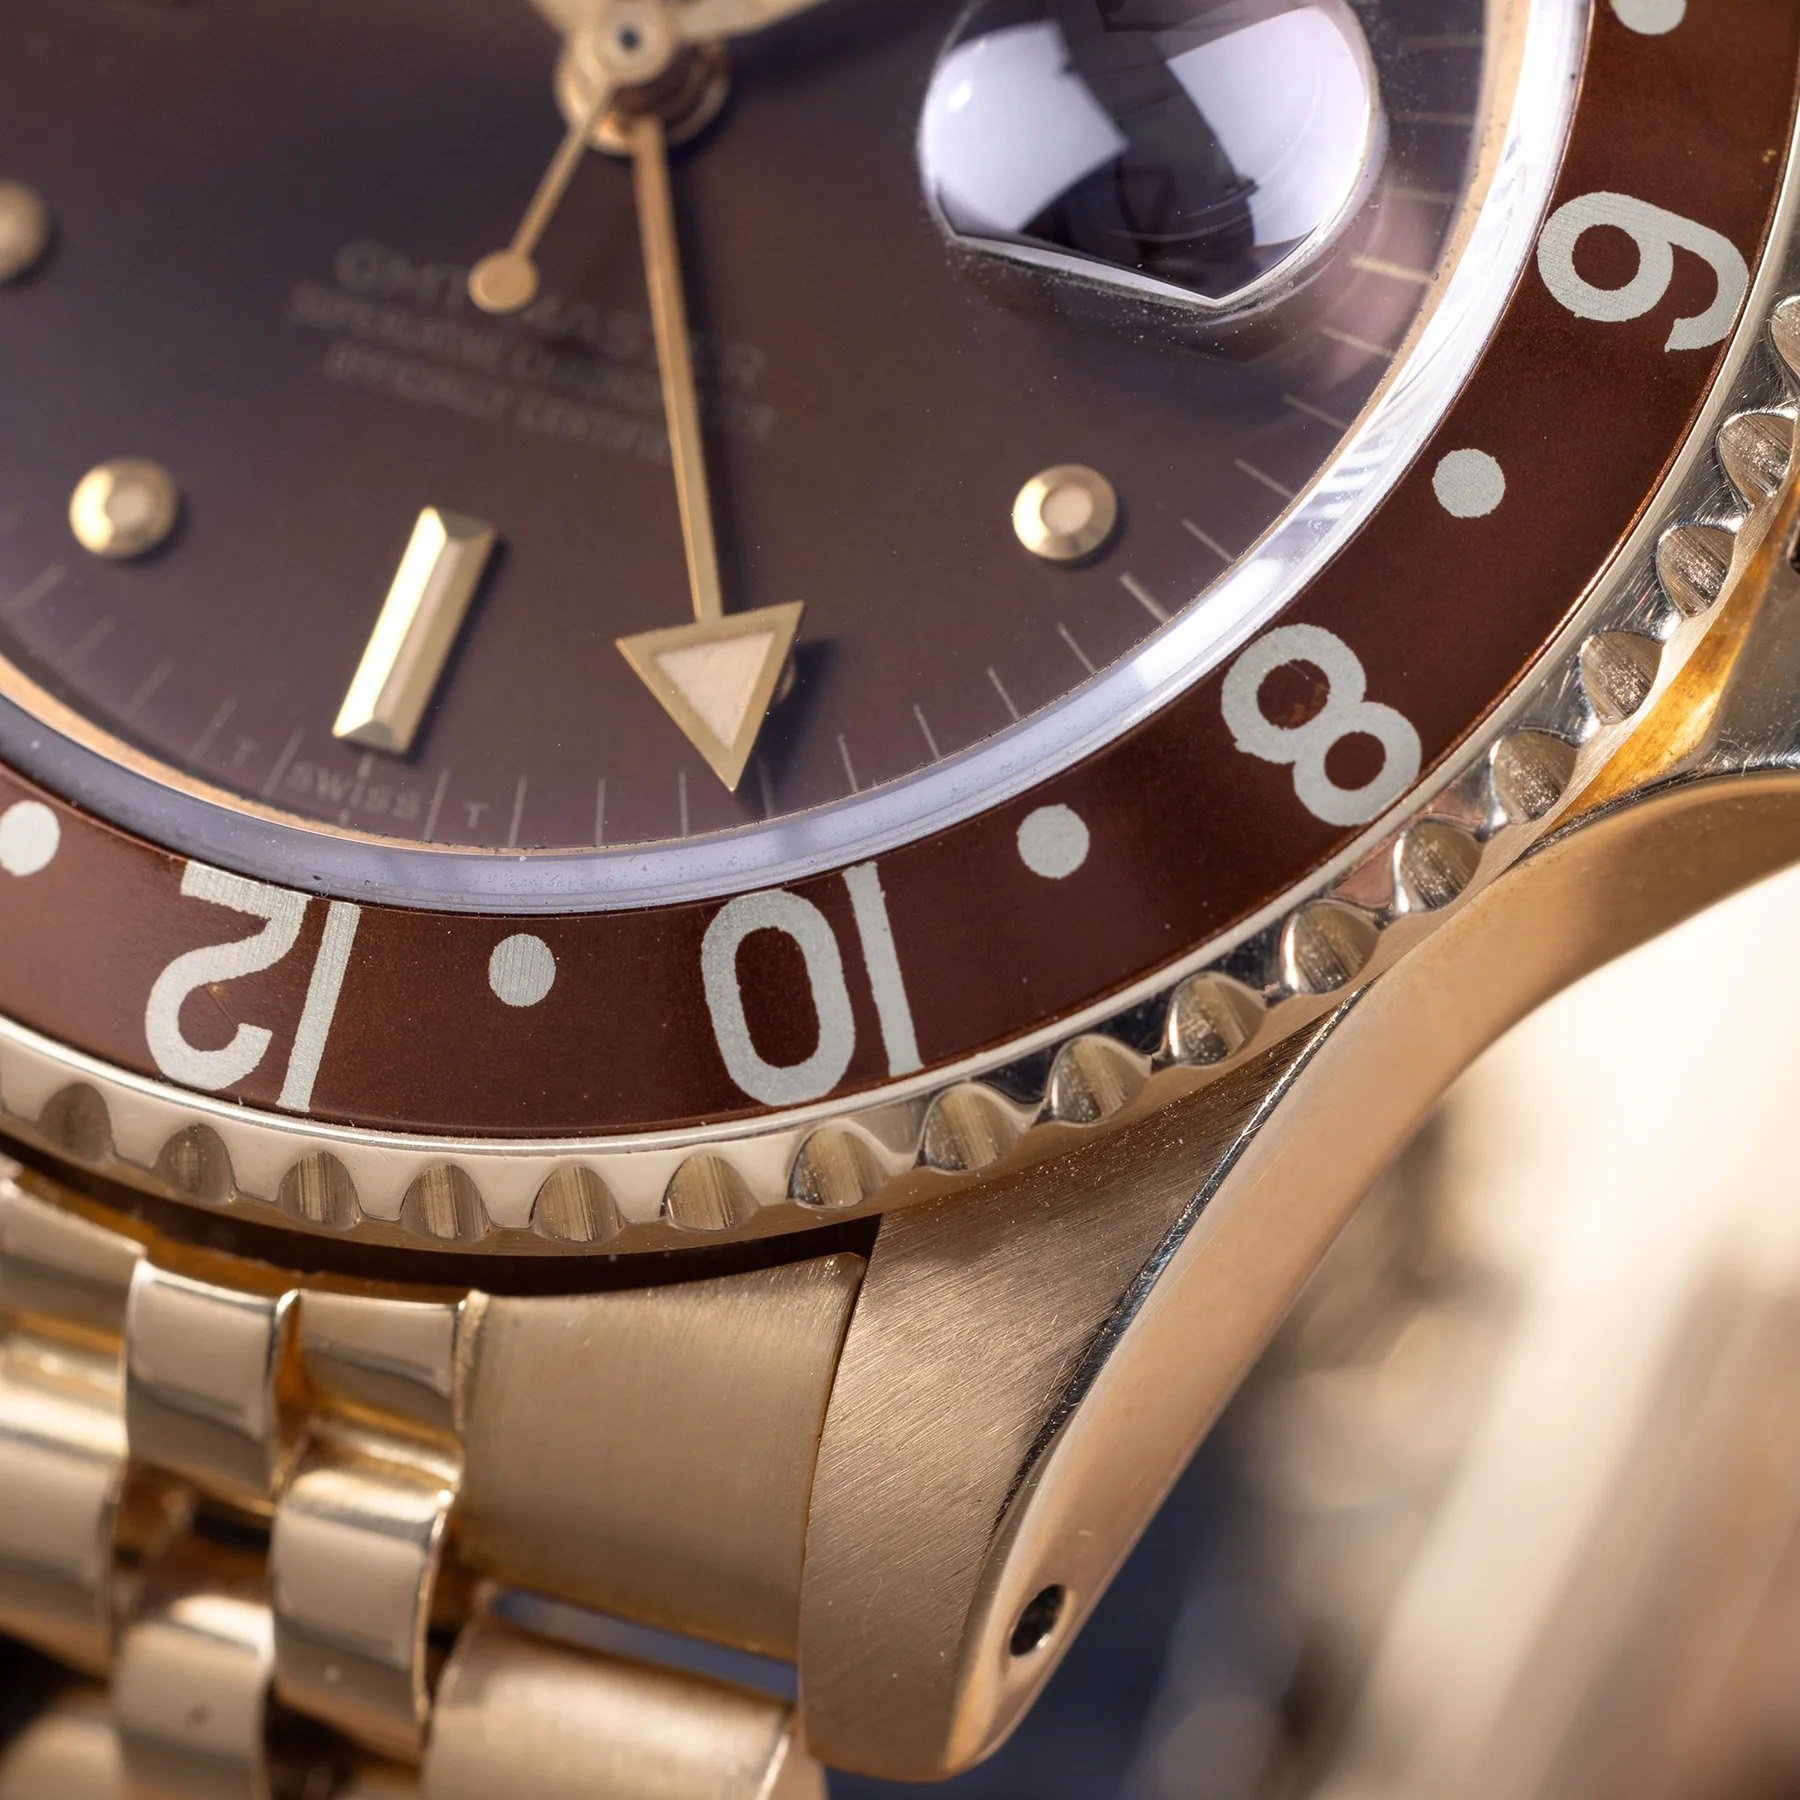 pre-owned full-gold Rolex GMT-Master ref. 1675/8